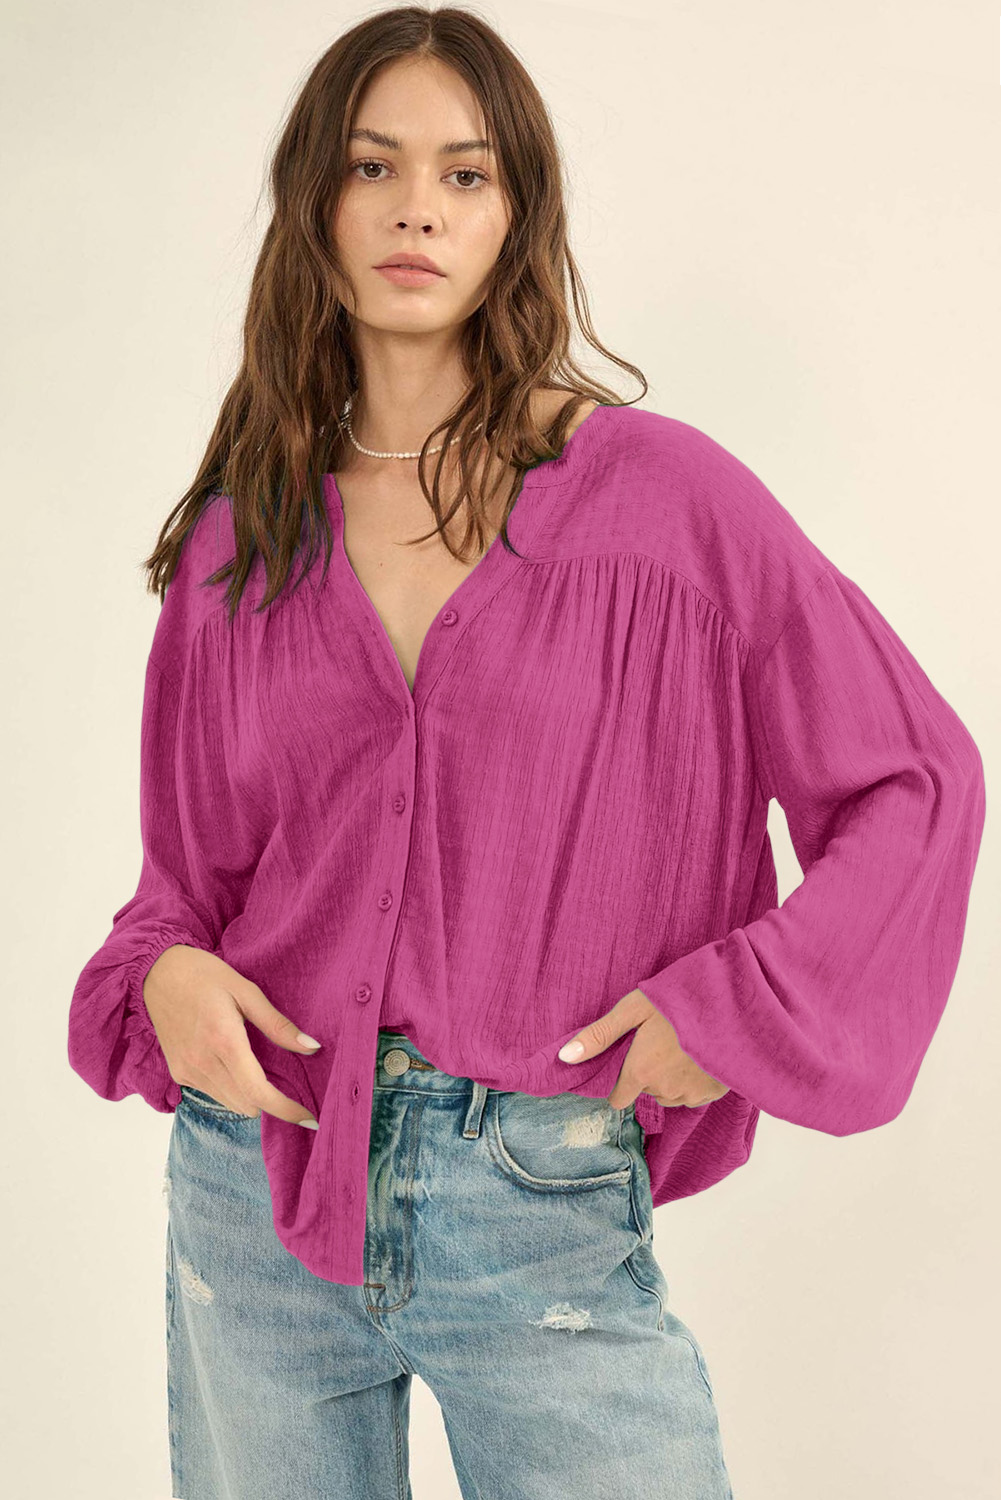 Azura Exchange Rose Solid Color Jacquard Puff Sleeve Button up Shirt